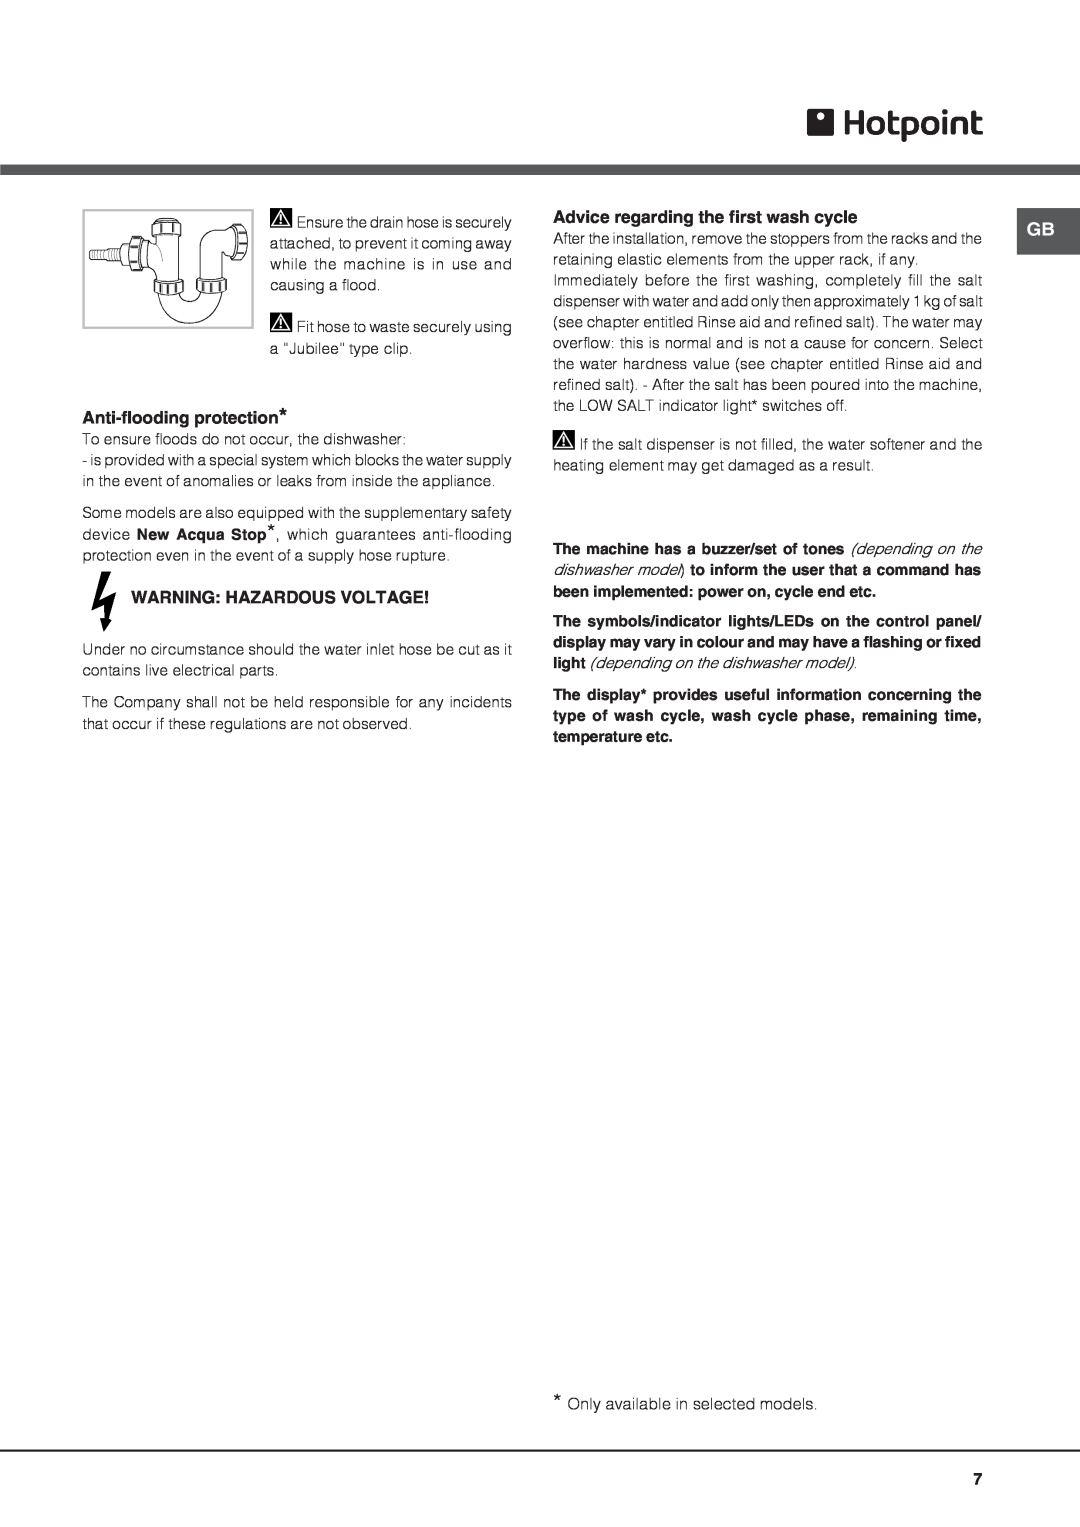 Hotpoint LSB 5B019 manual Anti-flooding protection, Warning Hazardous Voltage, Advice regarding the first wash cycle 